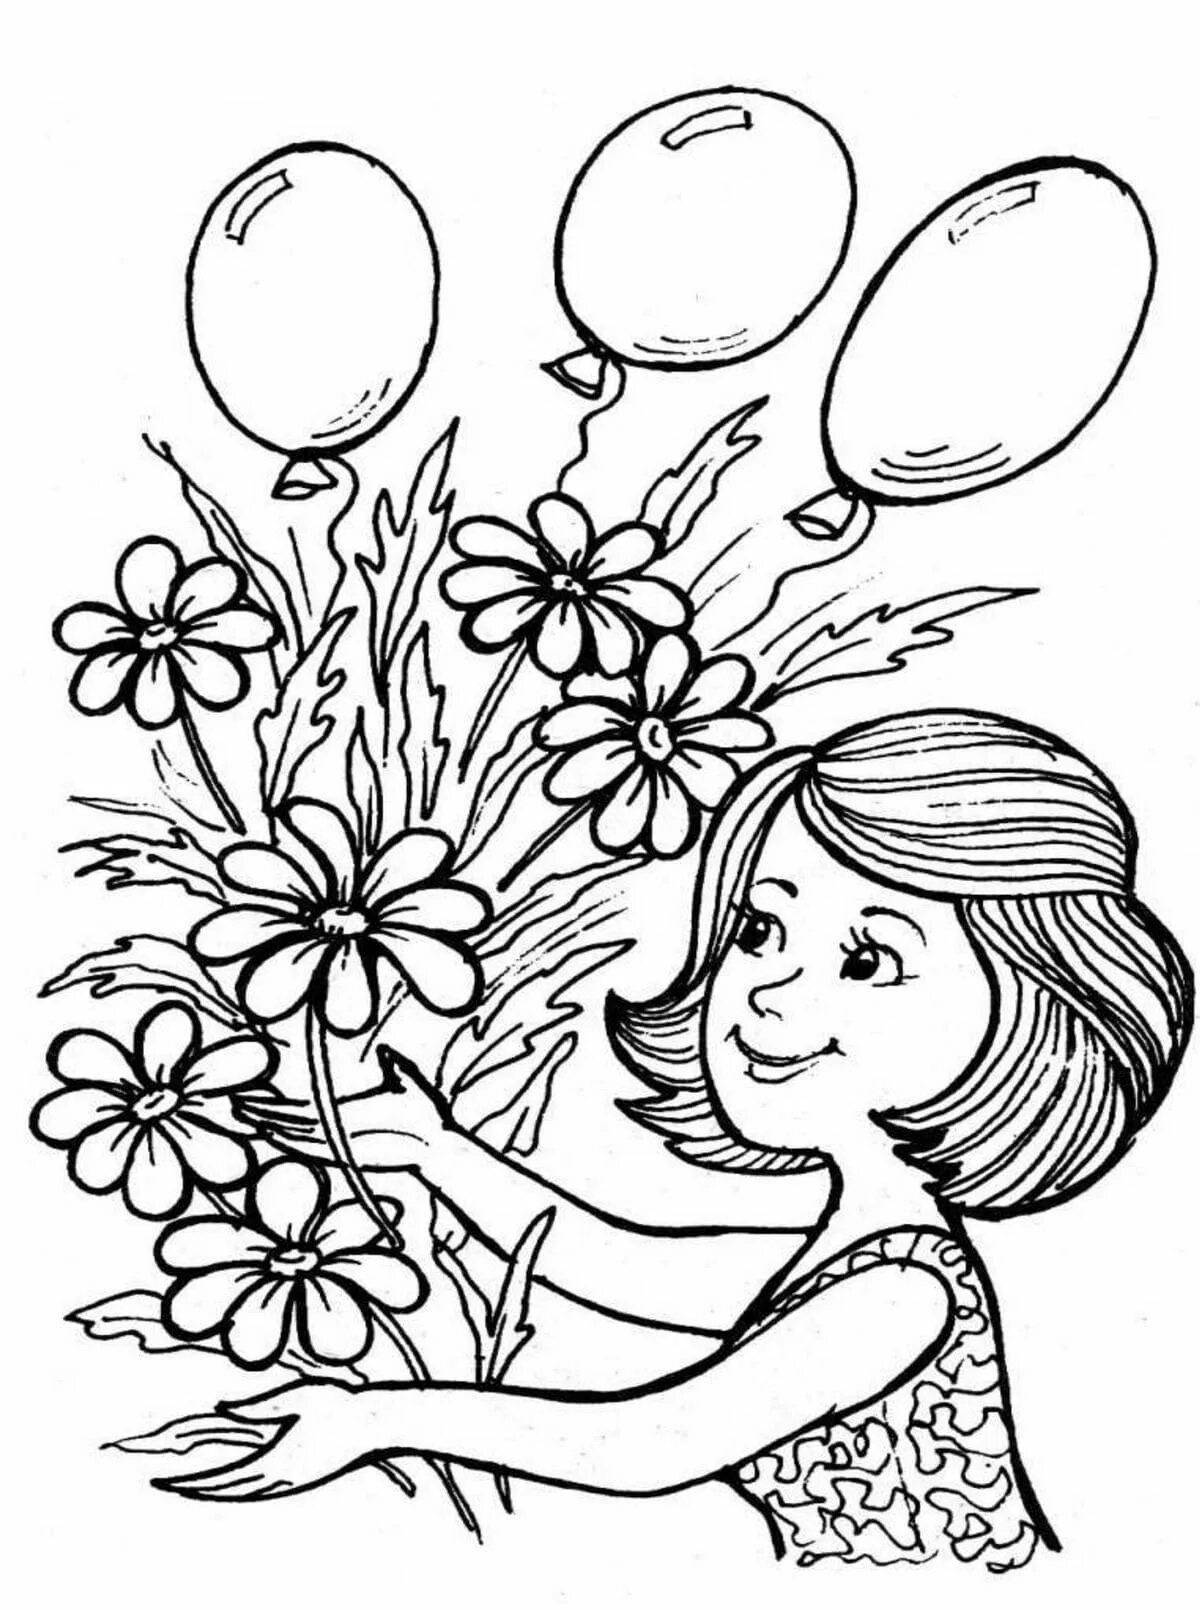 Amazing March 8 coloring pages for girls